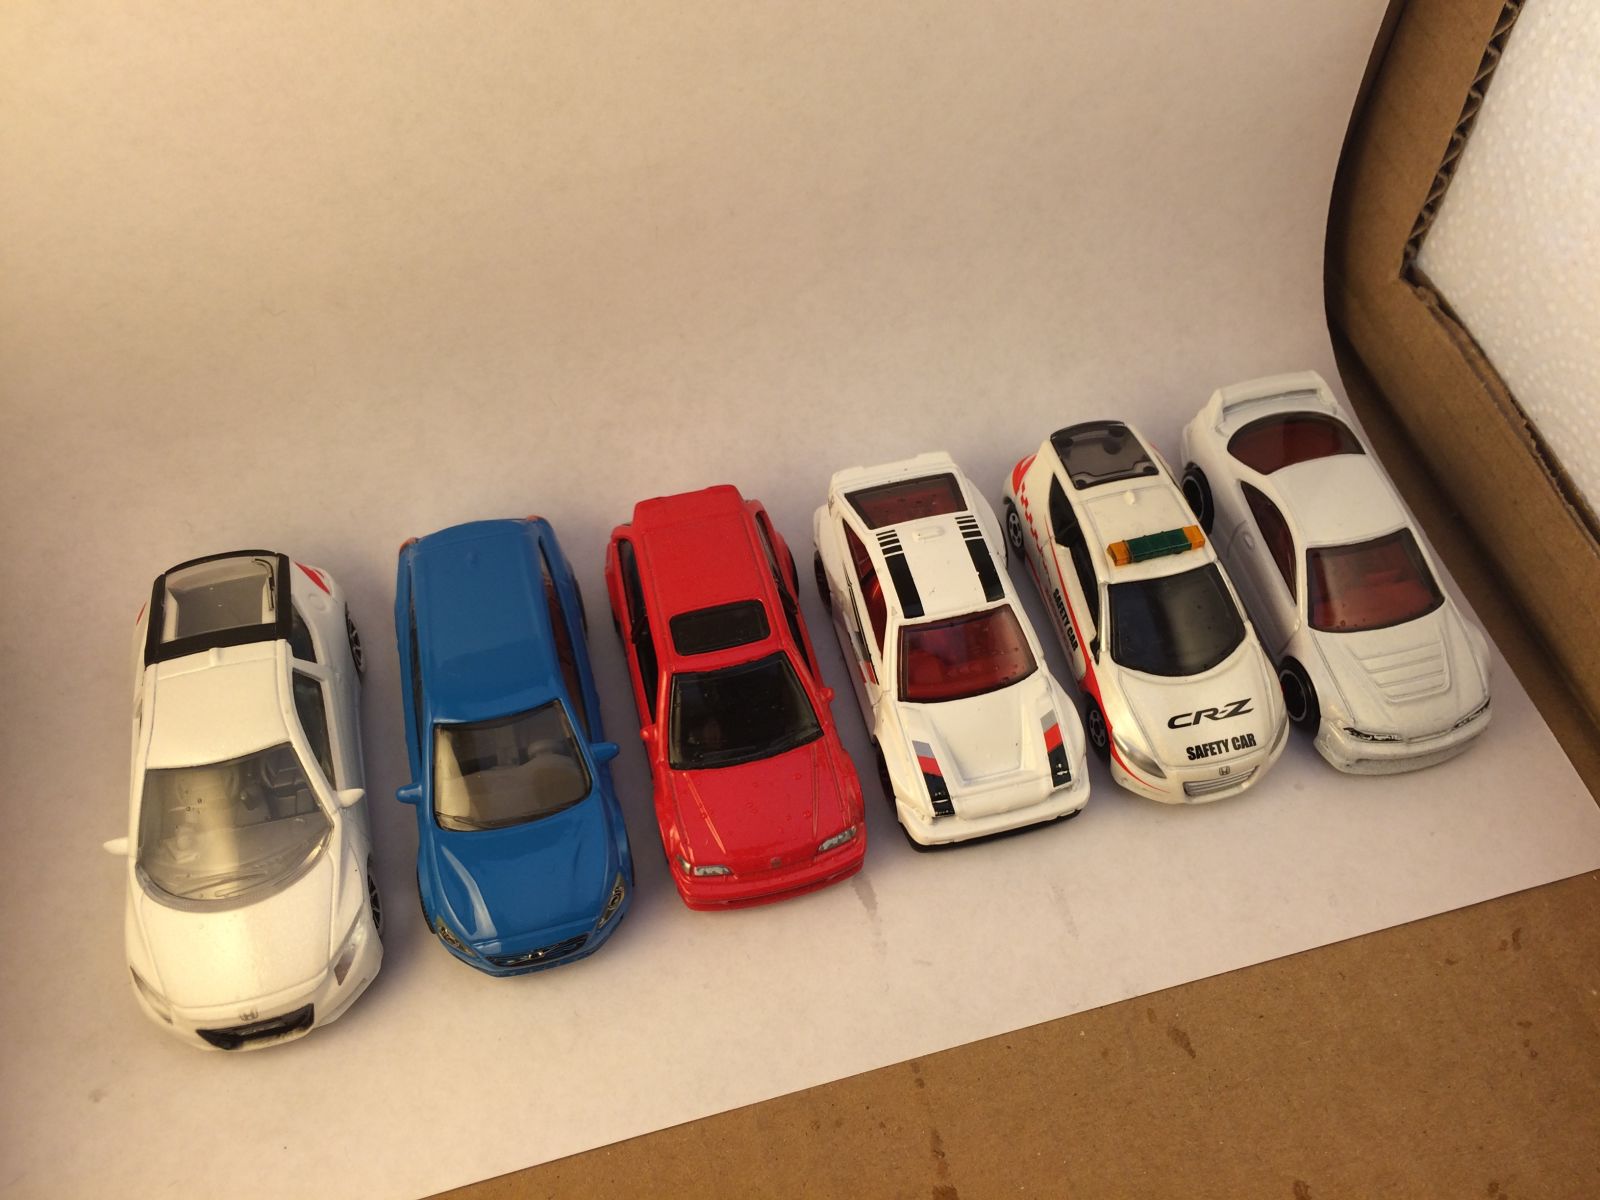 Scale comparison: Majorette is 1:55, Tomica is 1:61. All HW unlisted. 